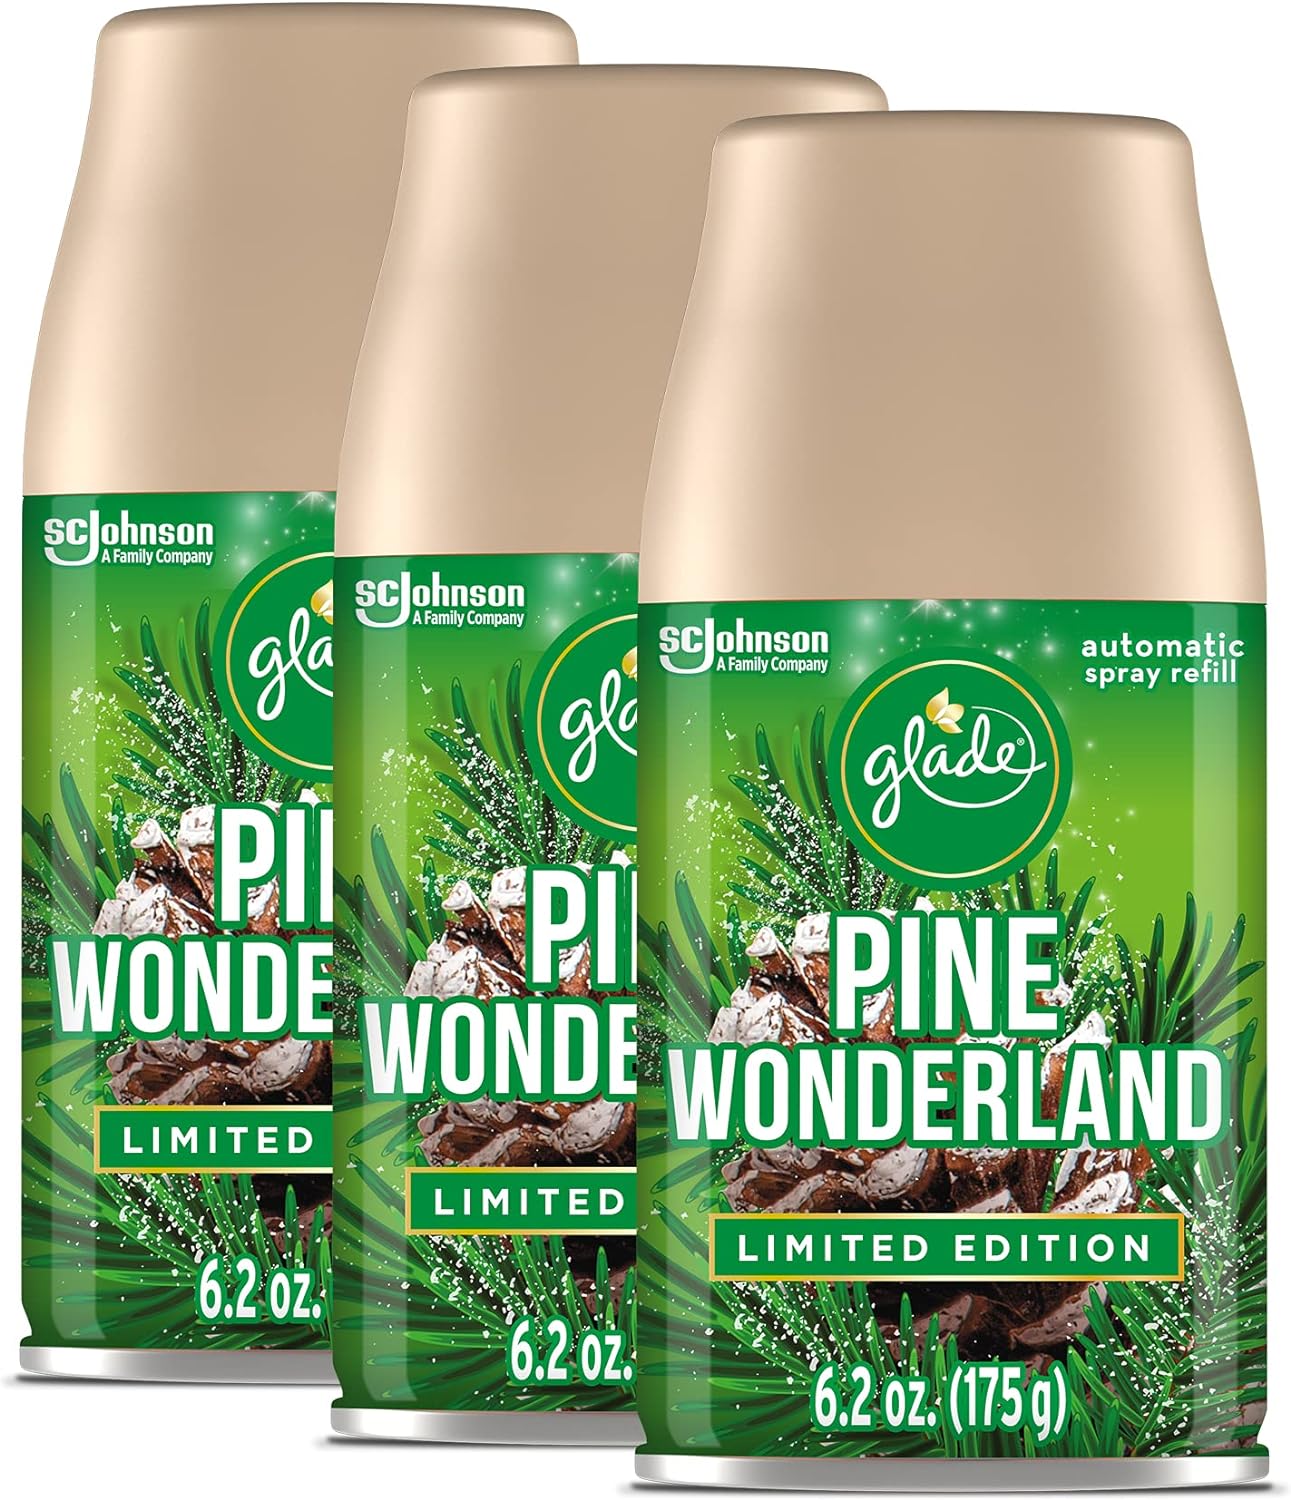 Glade Automatic Spray Refill, Air Freshener for Home and Bathroom, Pine Wonderland, 6.2 Oz, 3 Count